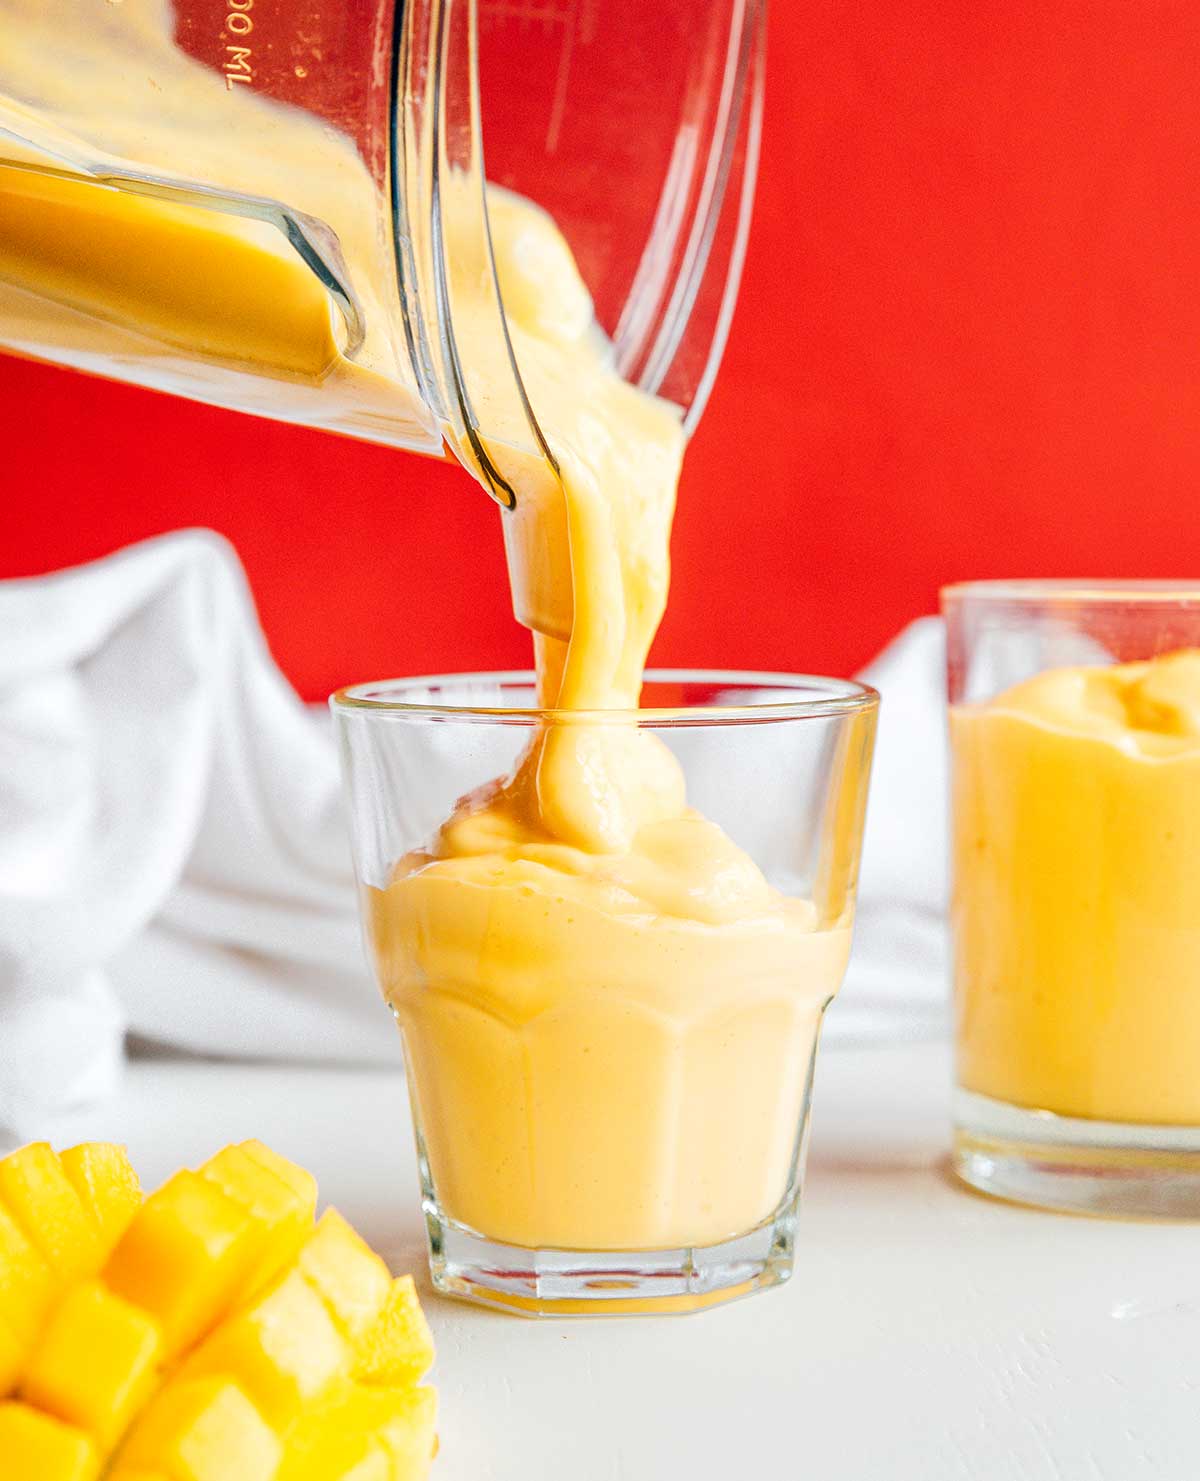 Pouring freshly blended mango smoothie from a blender into a glass